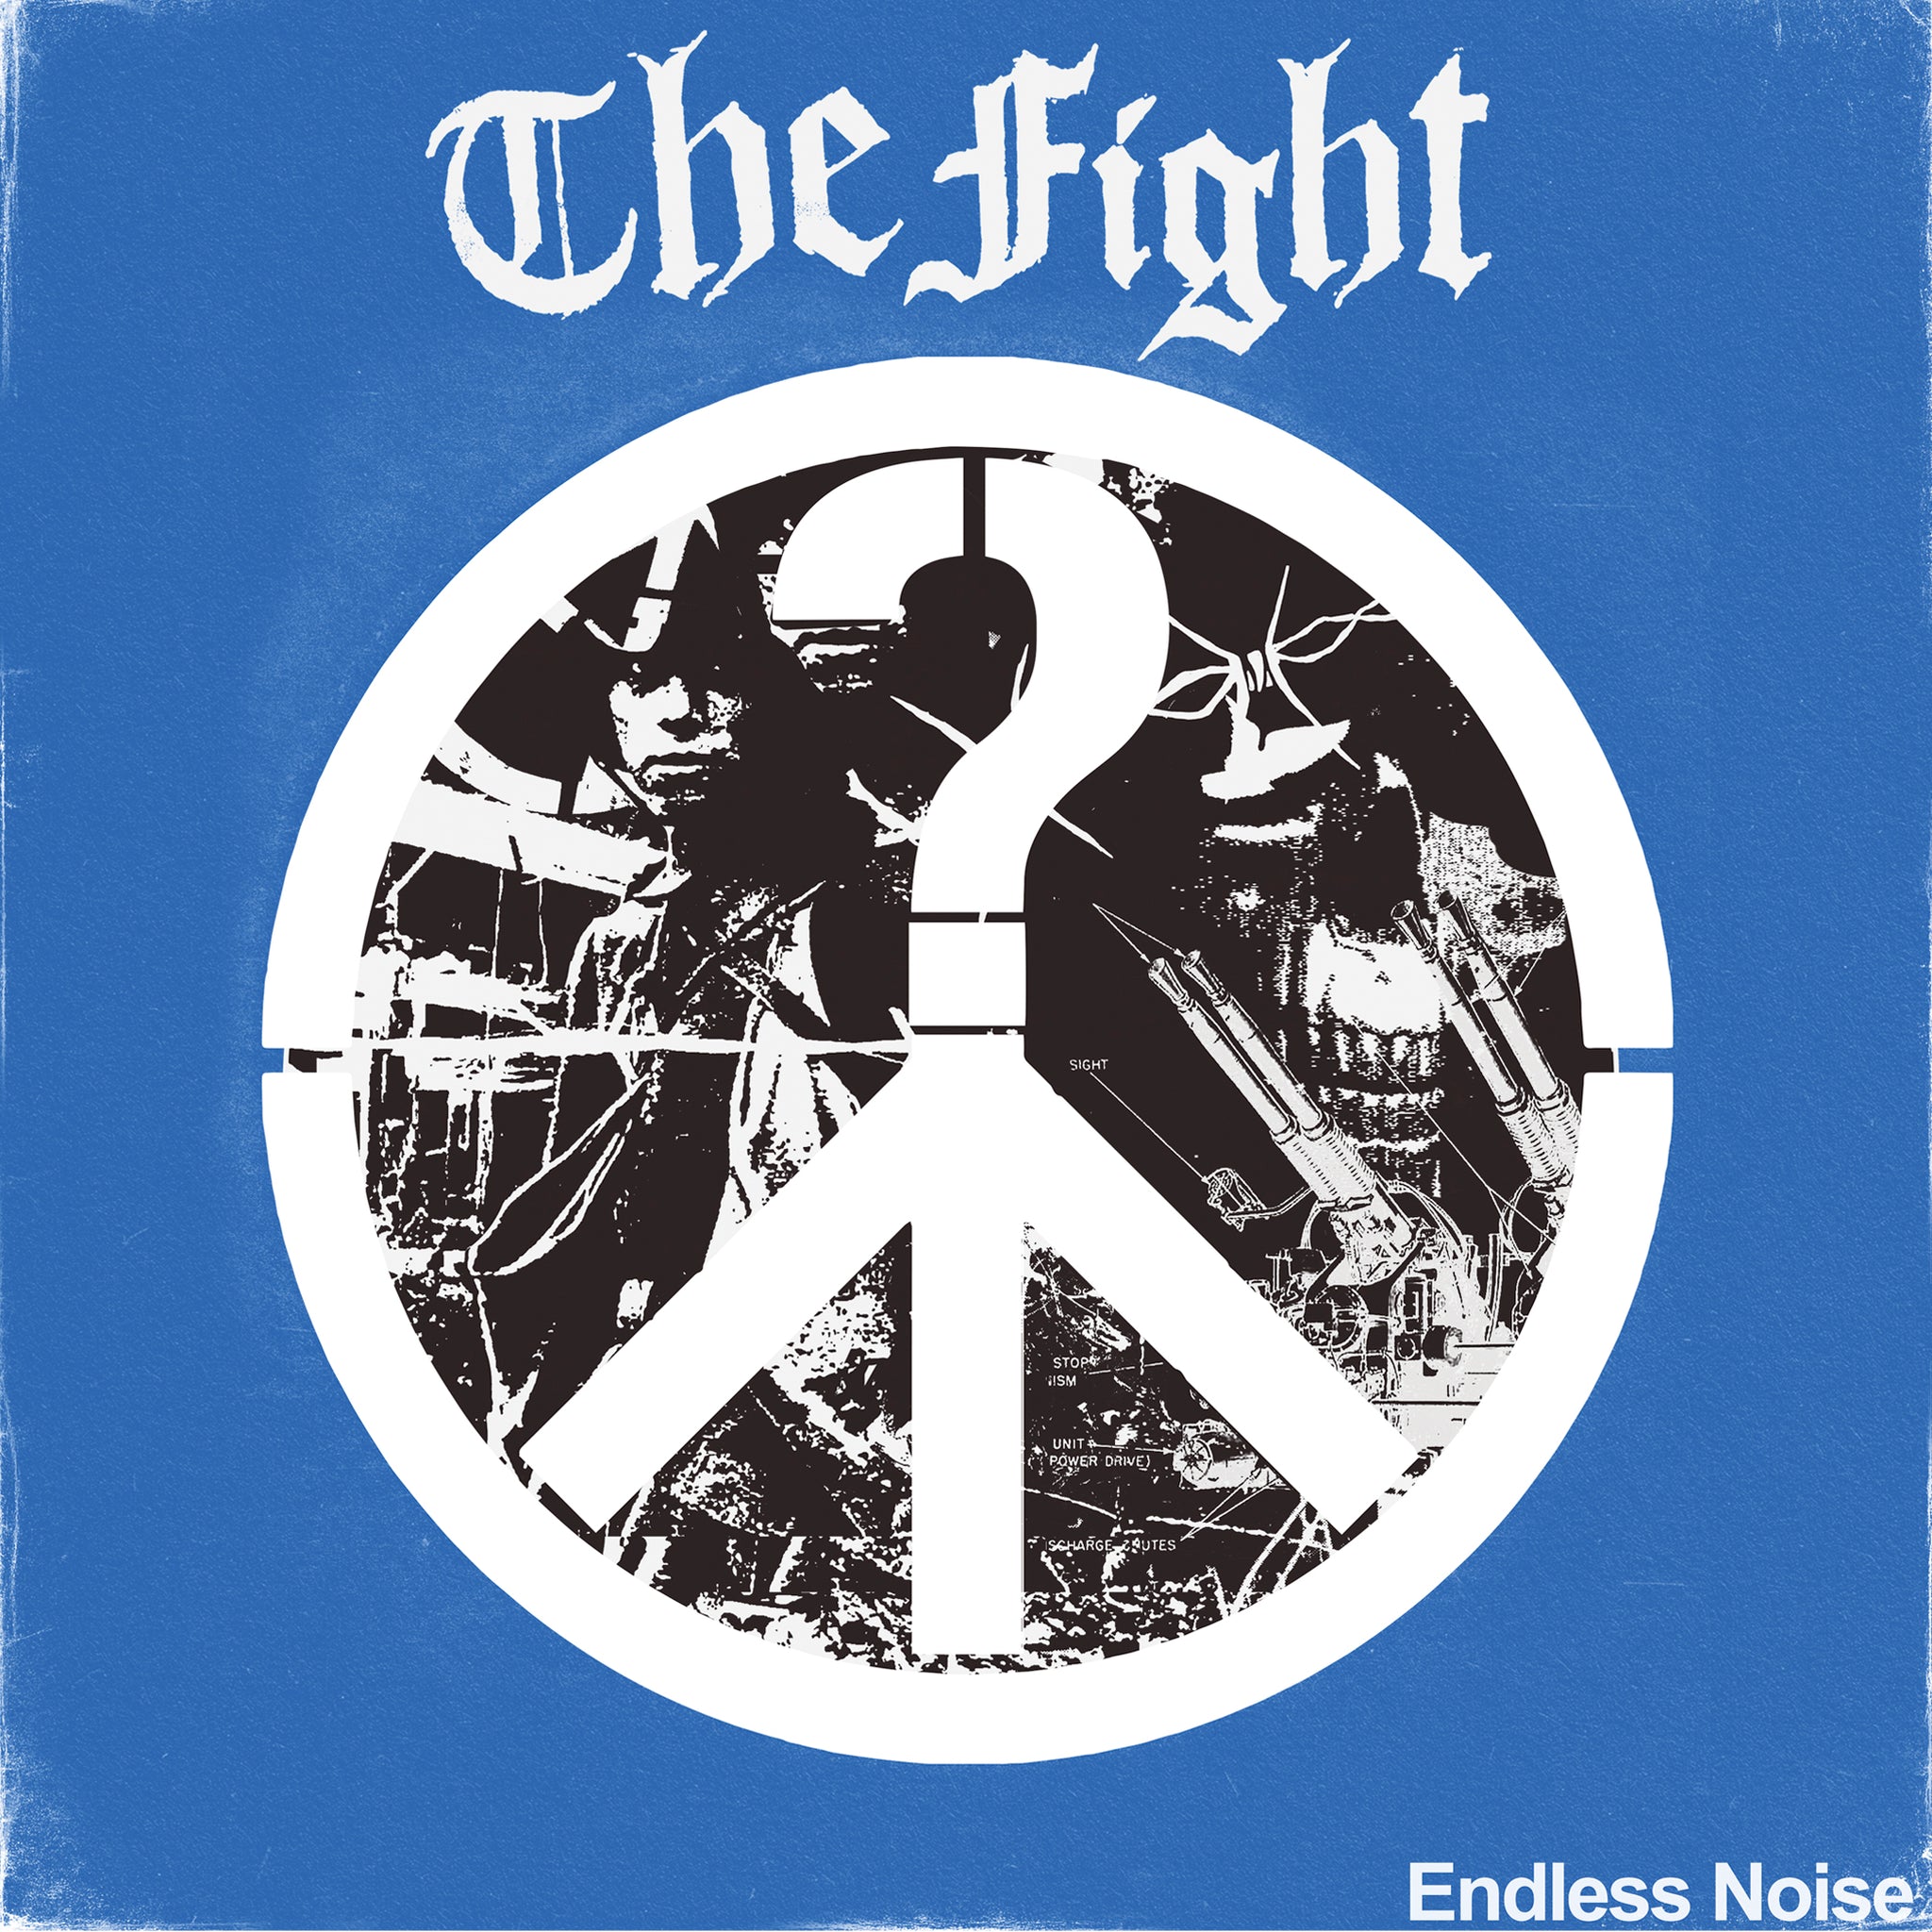 THE FIGHT - ENDLESS NOISE 12" EP